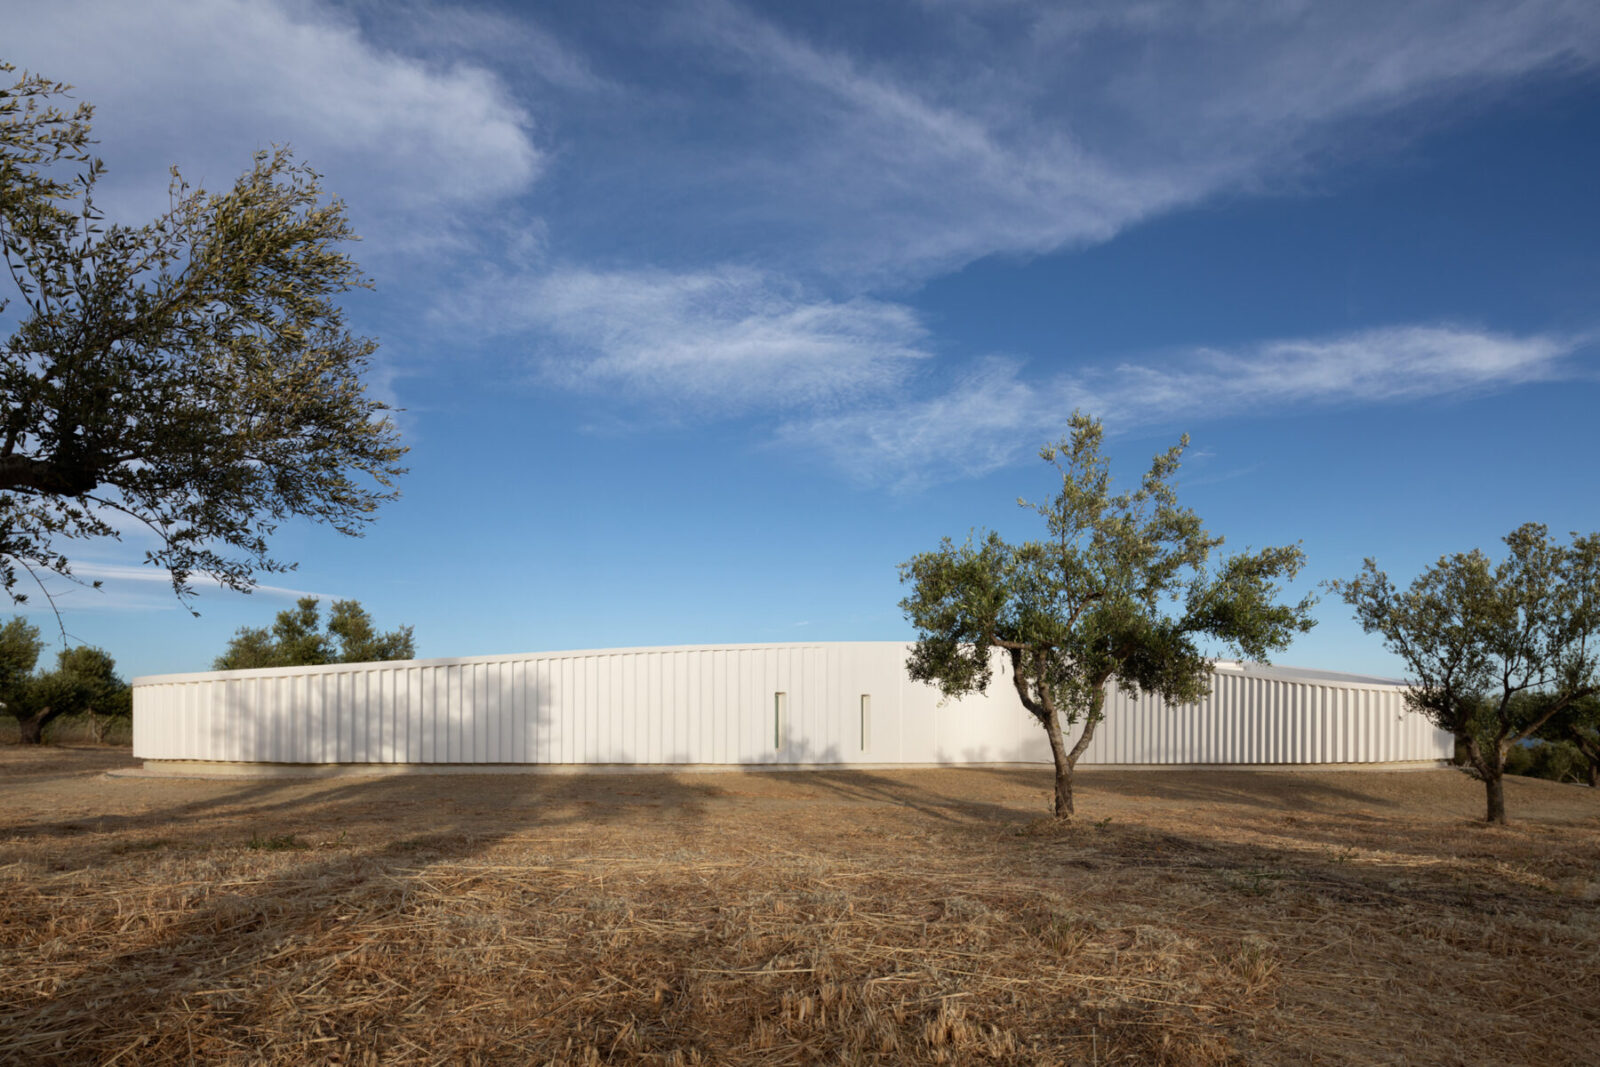 Archisearch KHI House & Art Space in Methoni, Greece | LASSA Architects